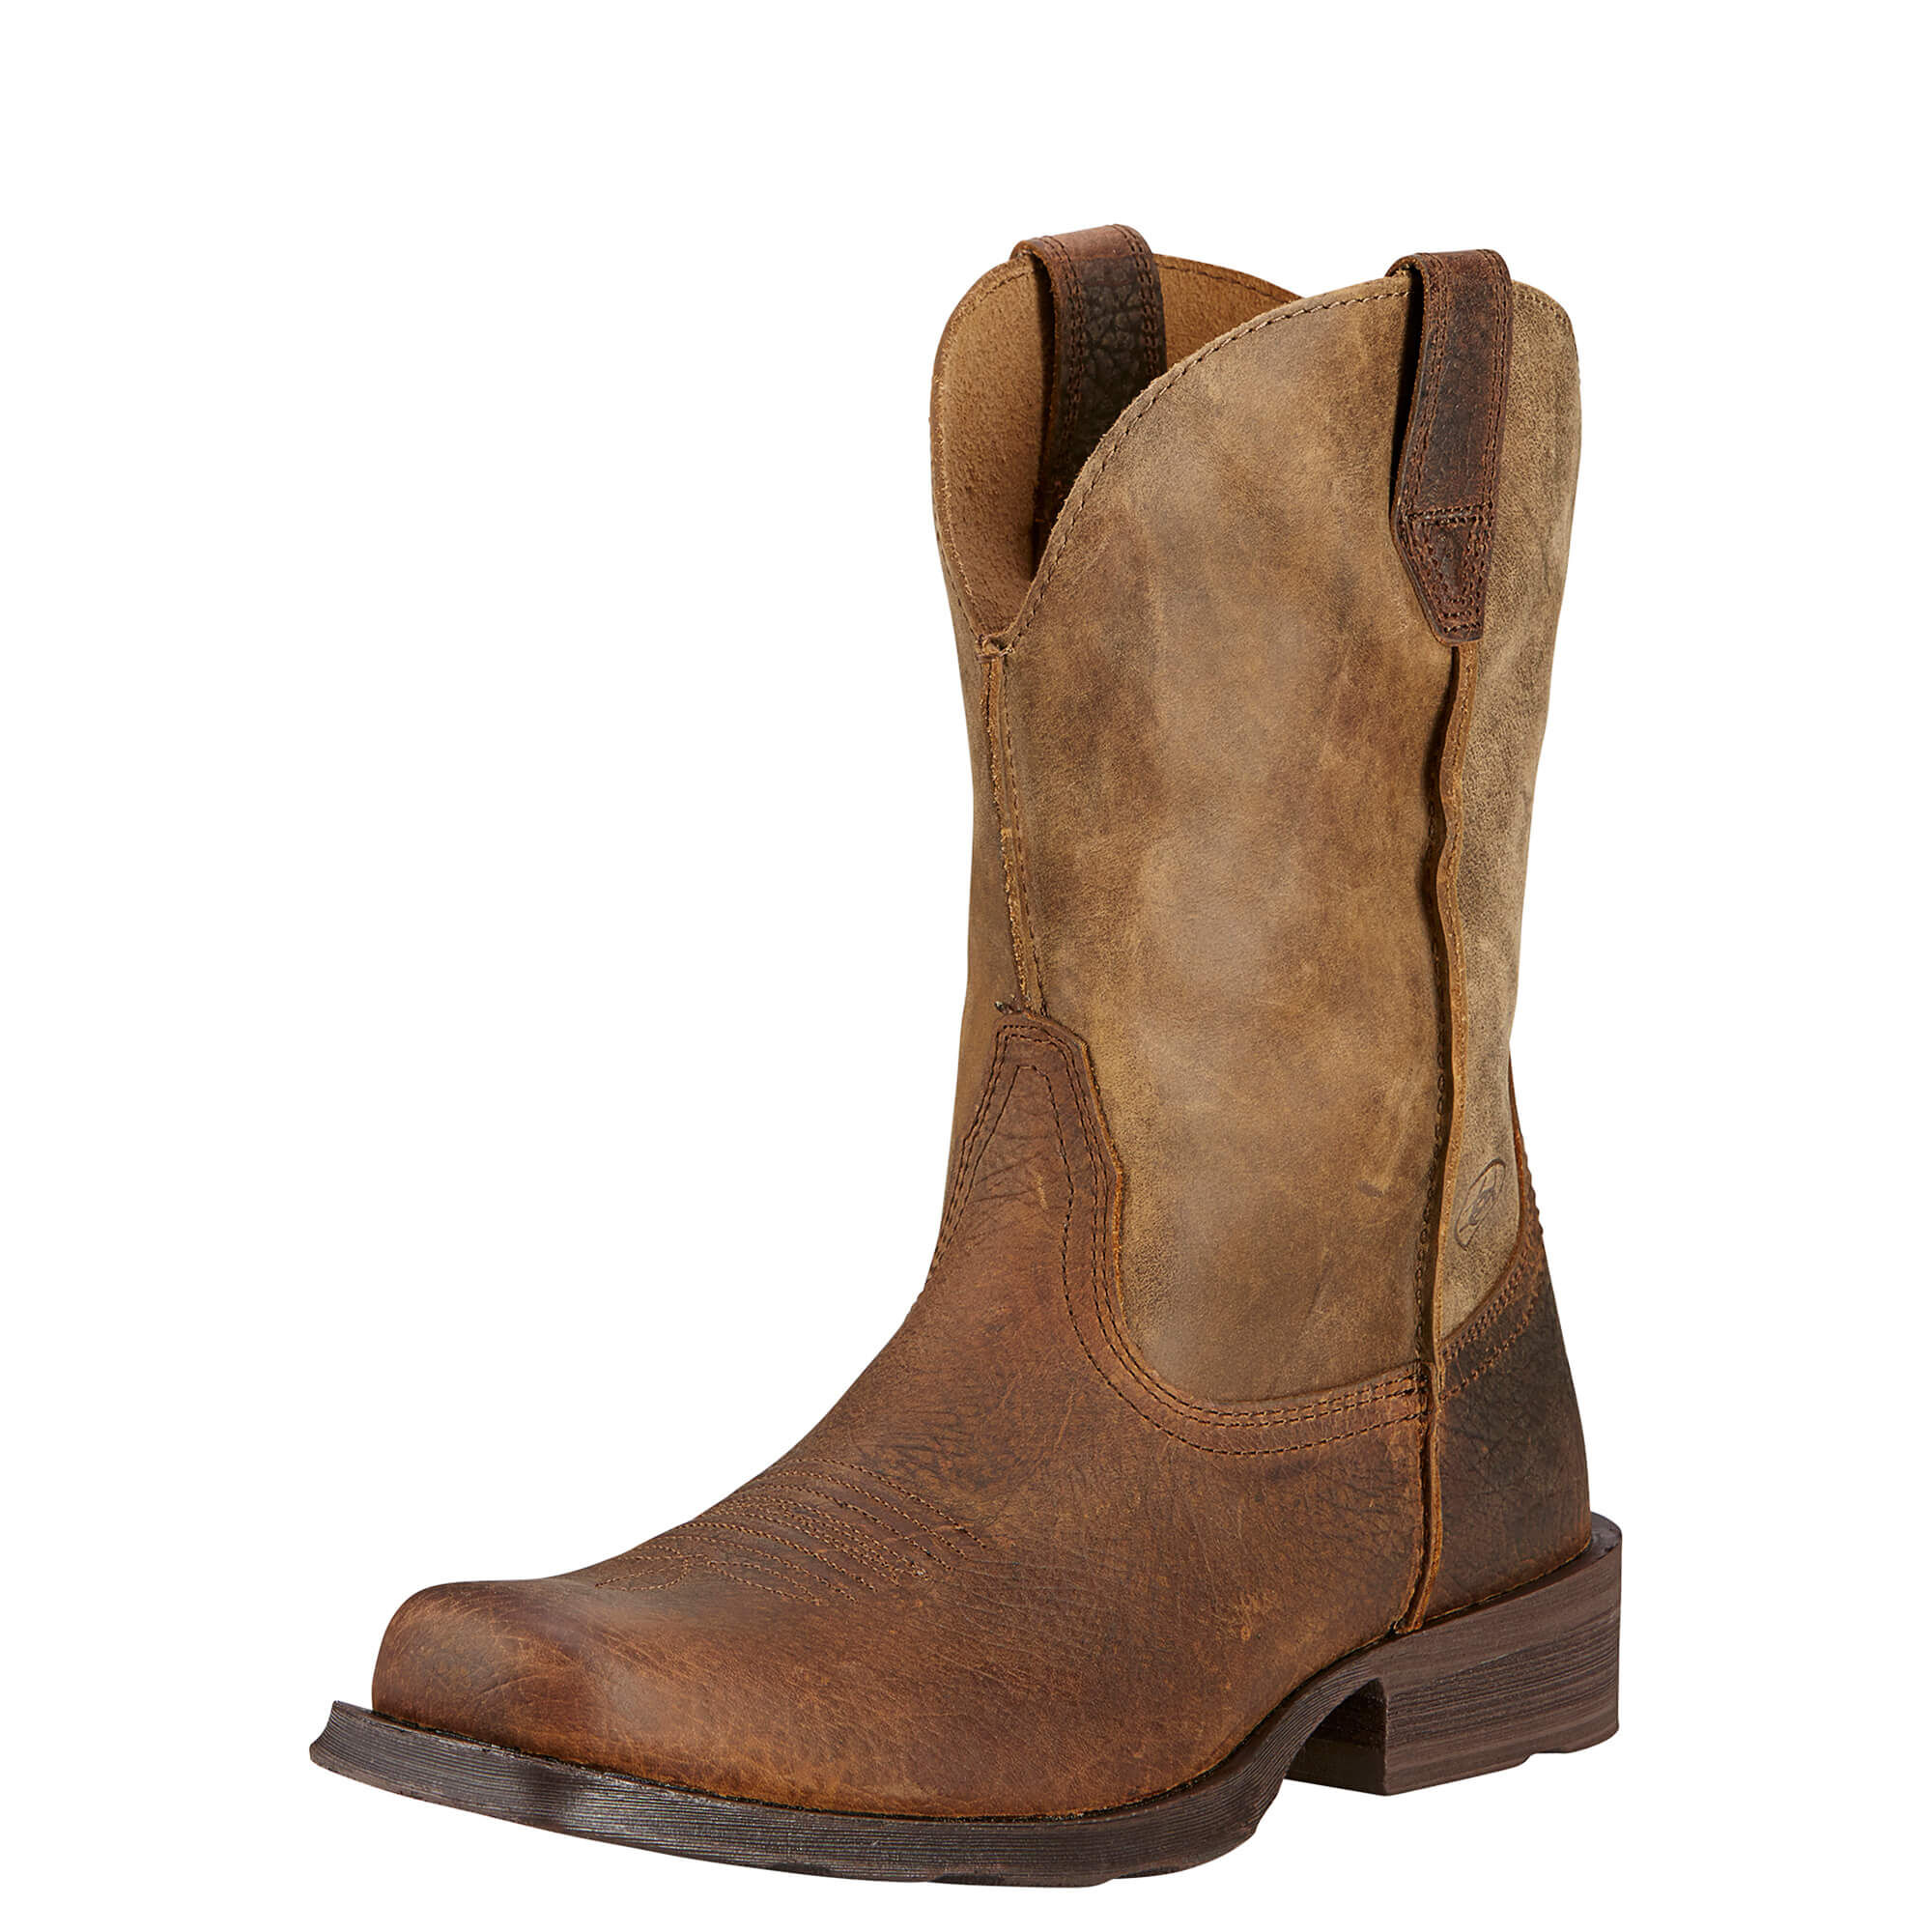 ariat rambler leather sole western boot